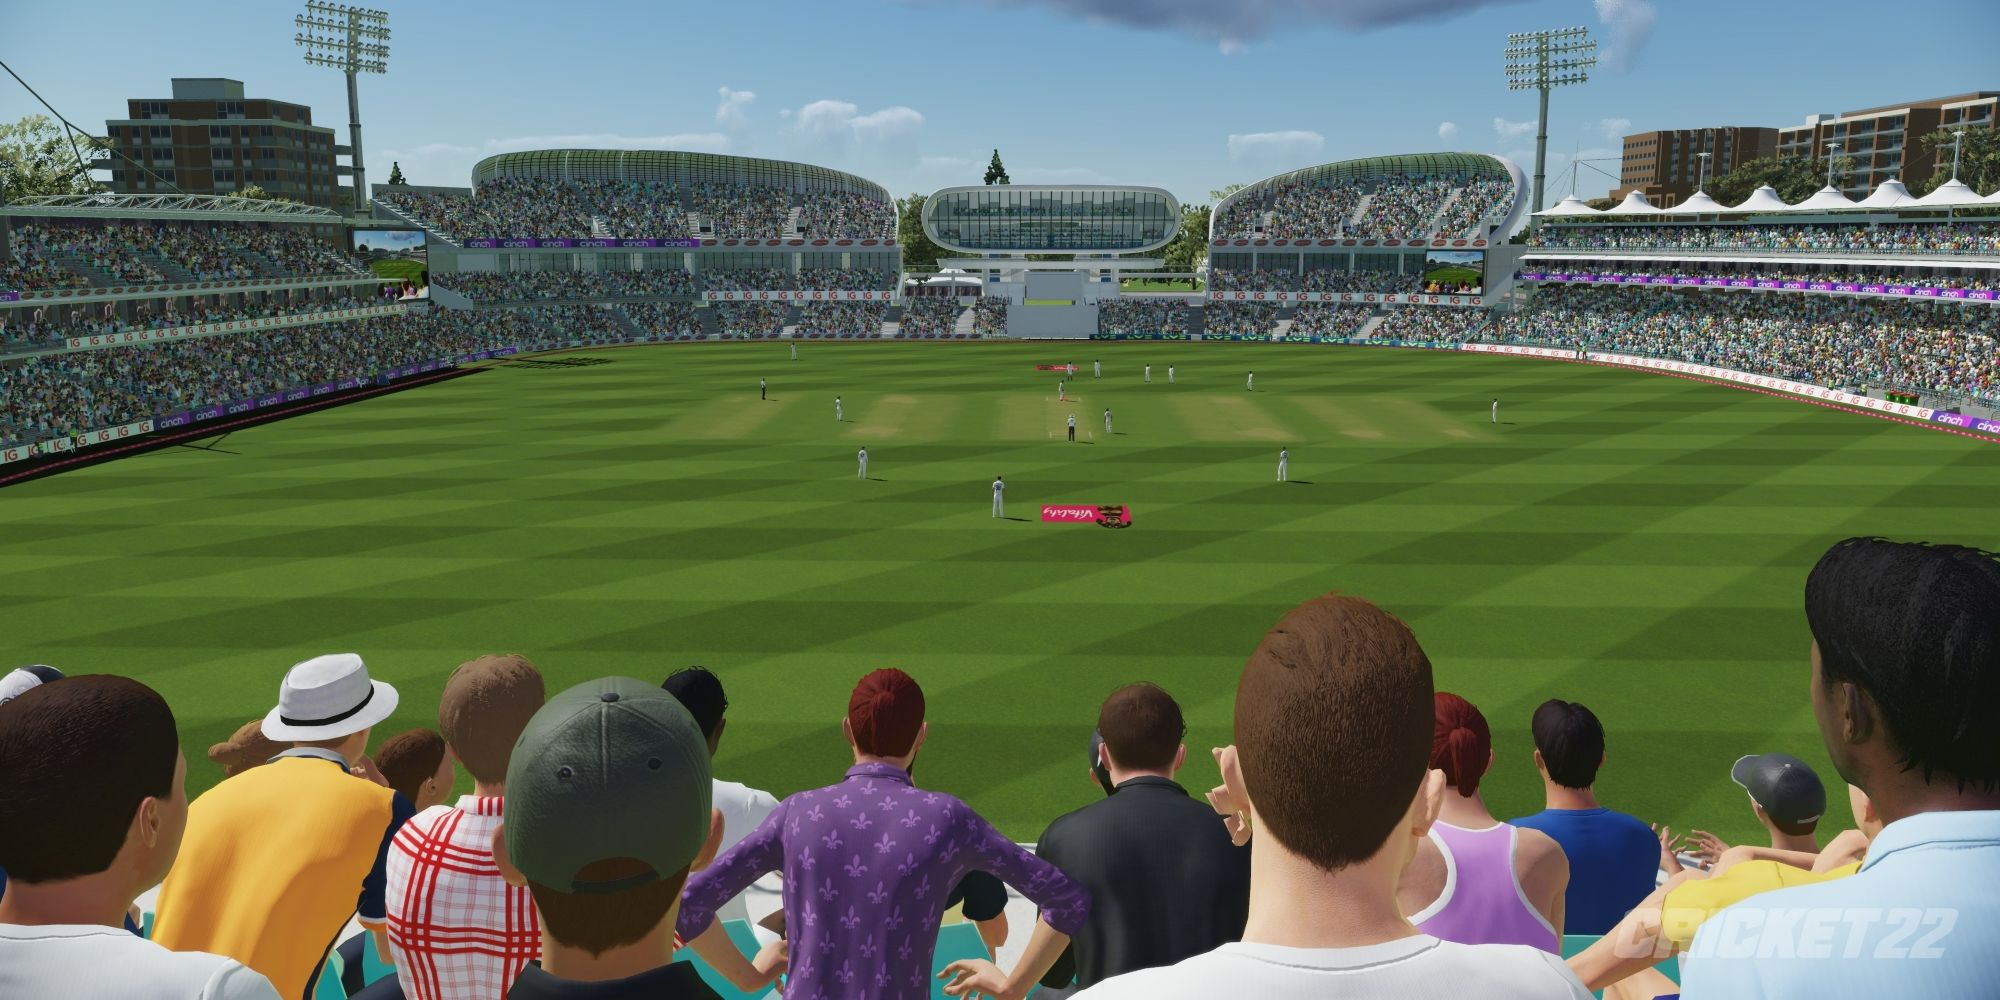 a wide angle shot overlooking a stadium with a cricket match happening in the middle from behind a large crowd of people